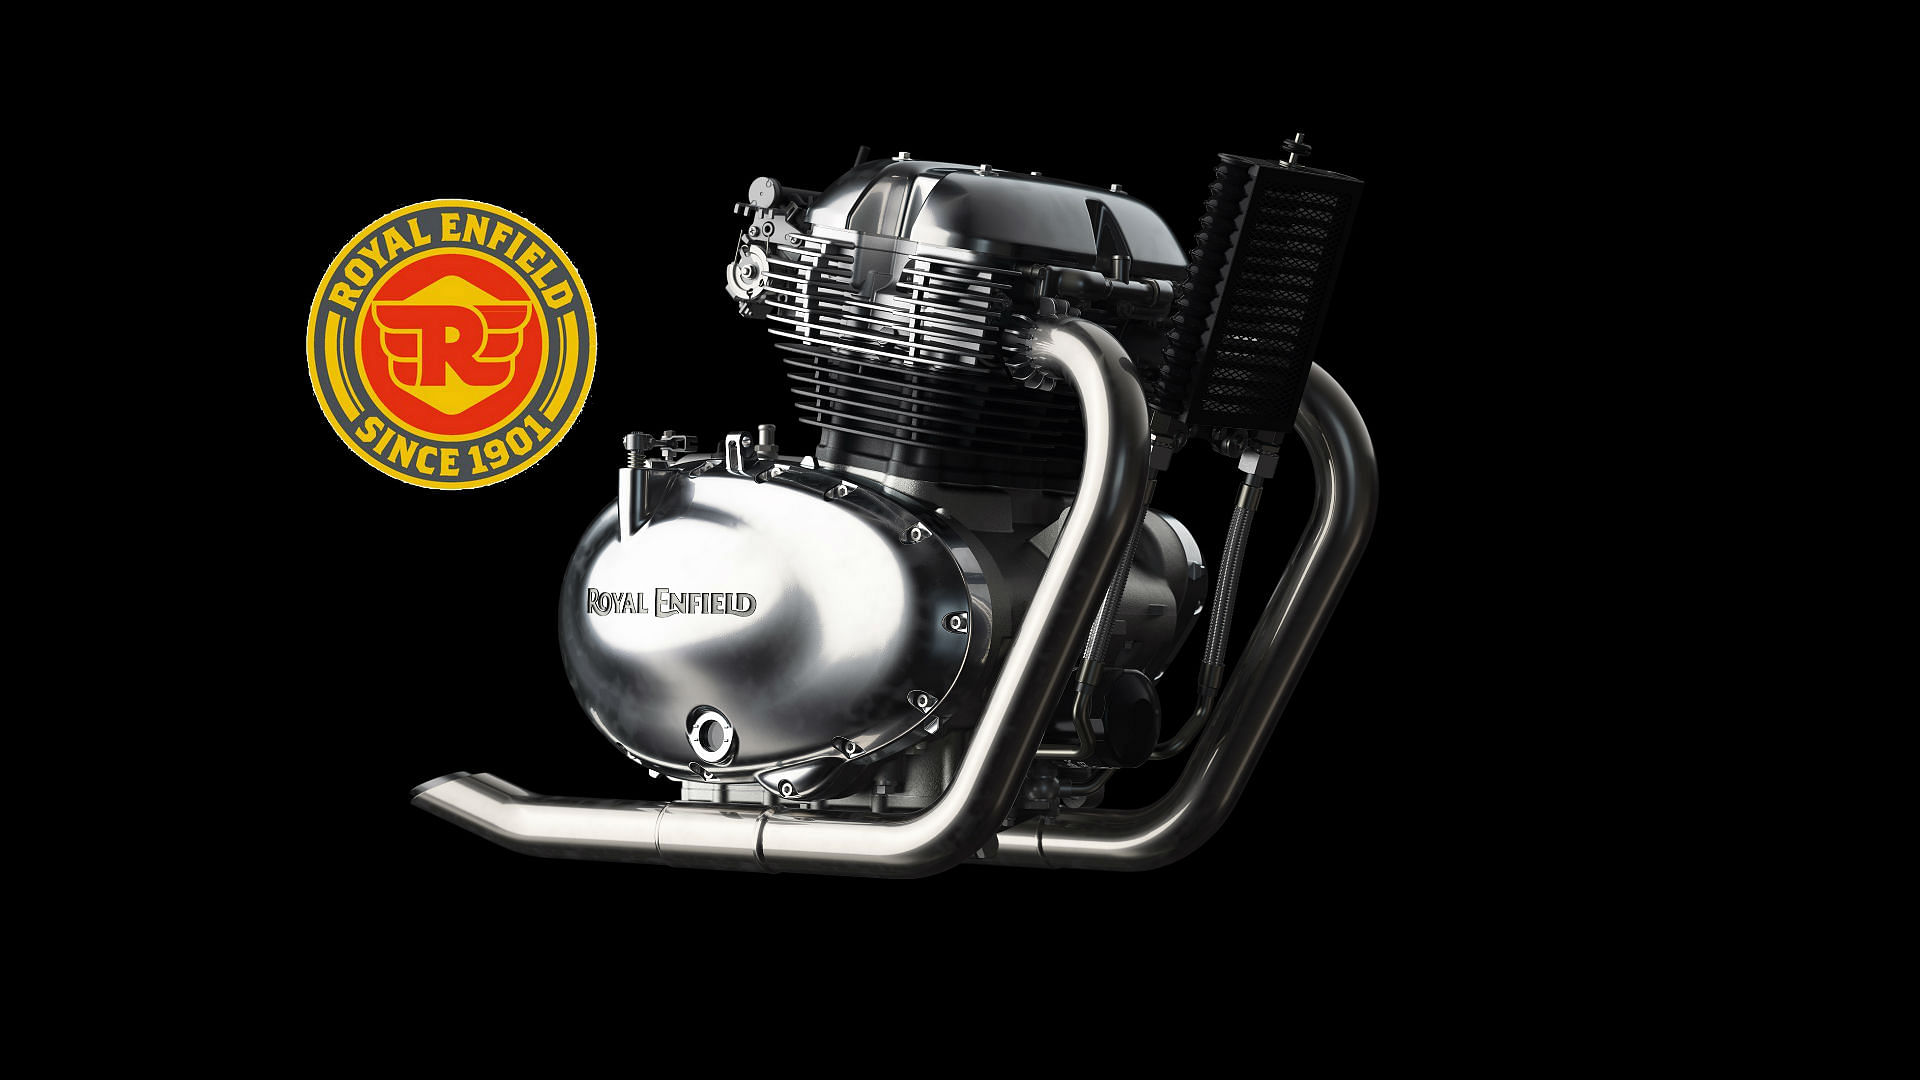 Their first 650-cc twin engine unit could debut on bikes at EICMA 2017.&nbsp;